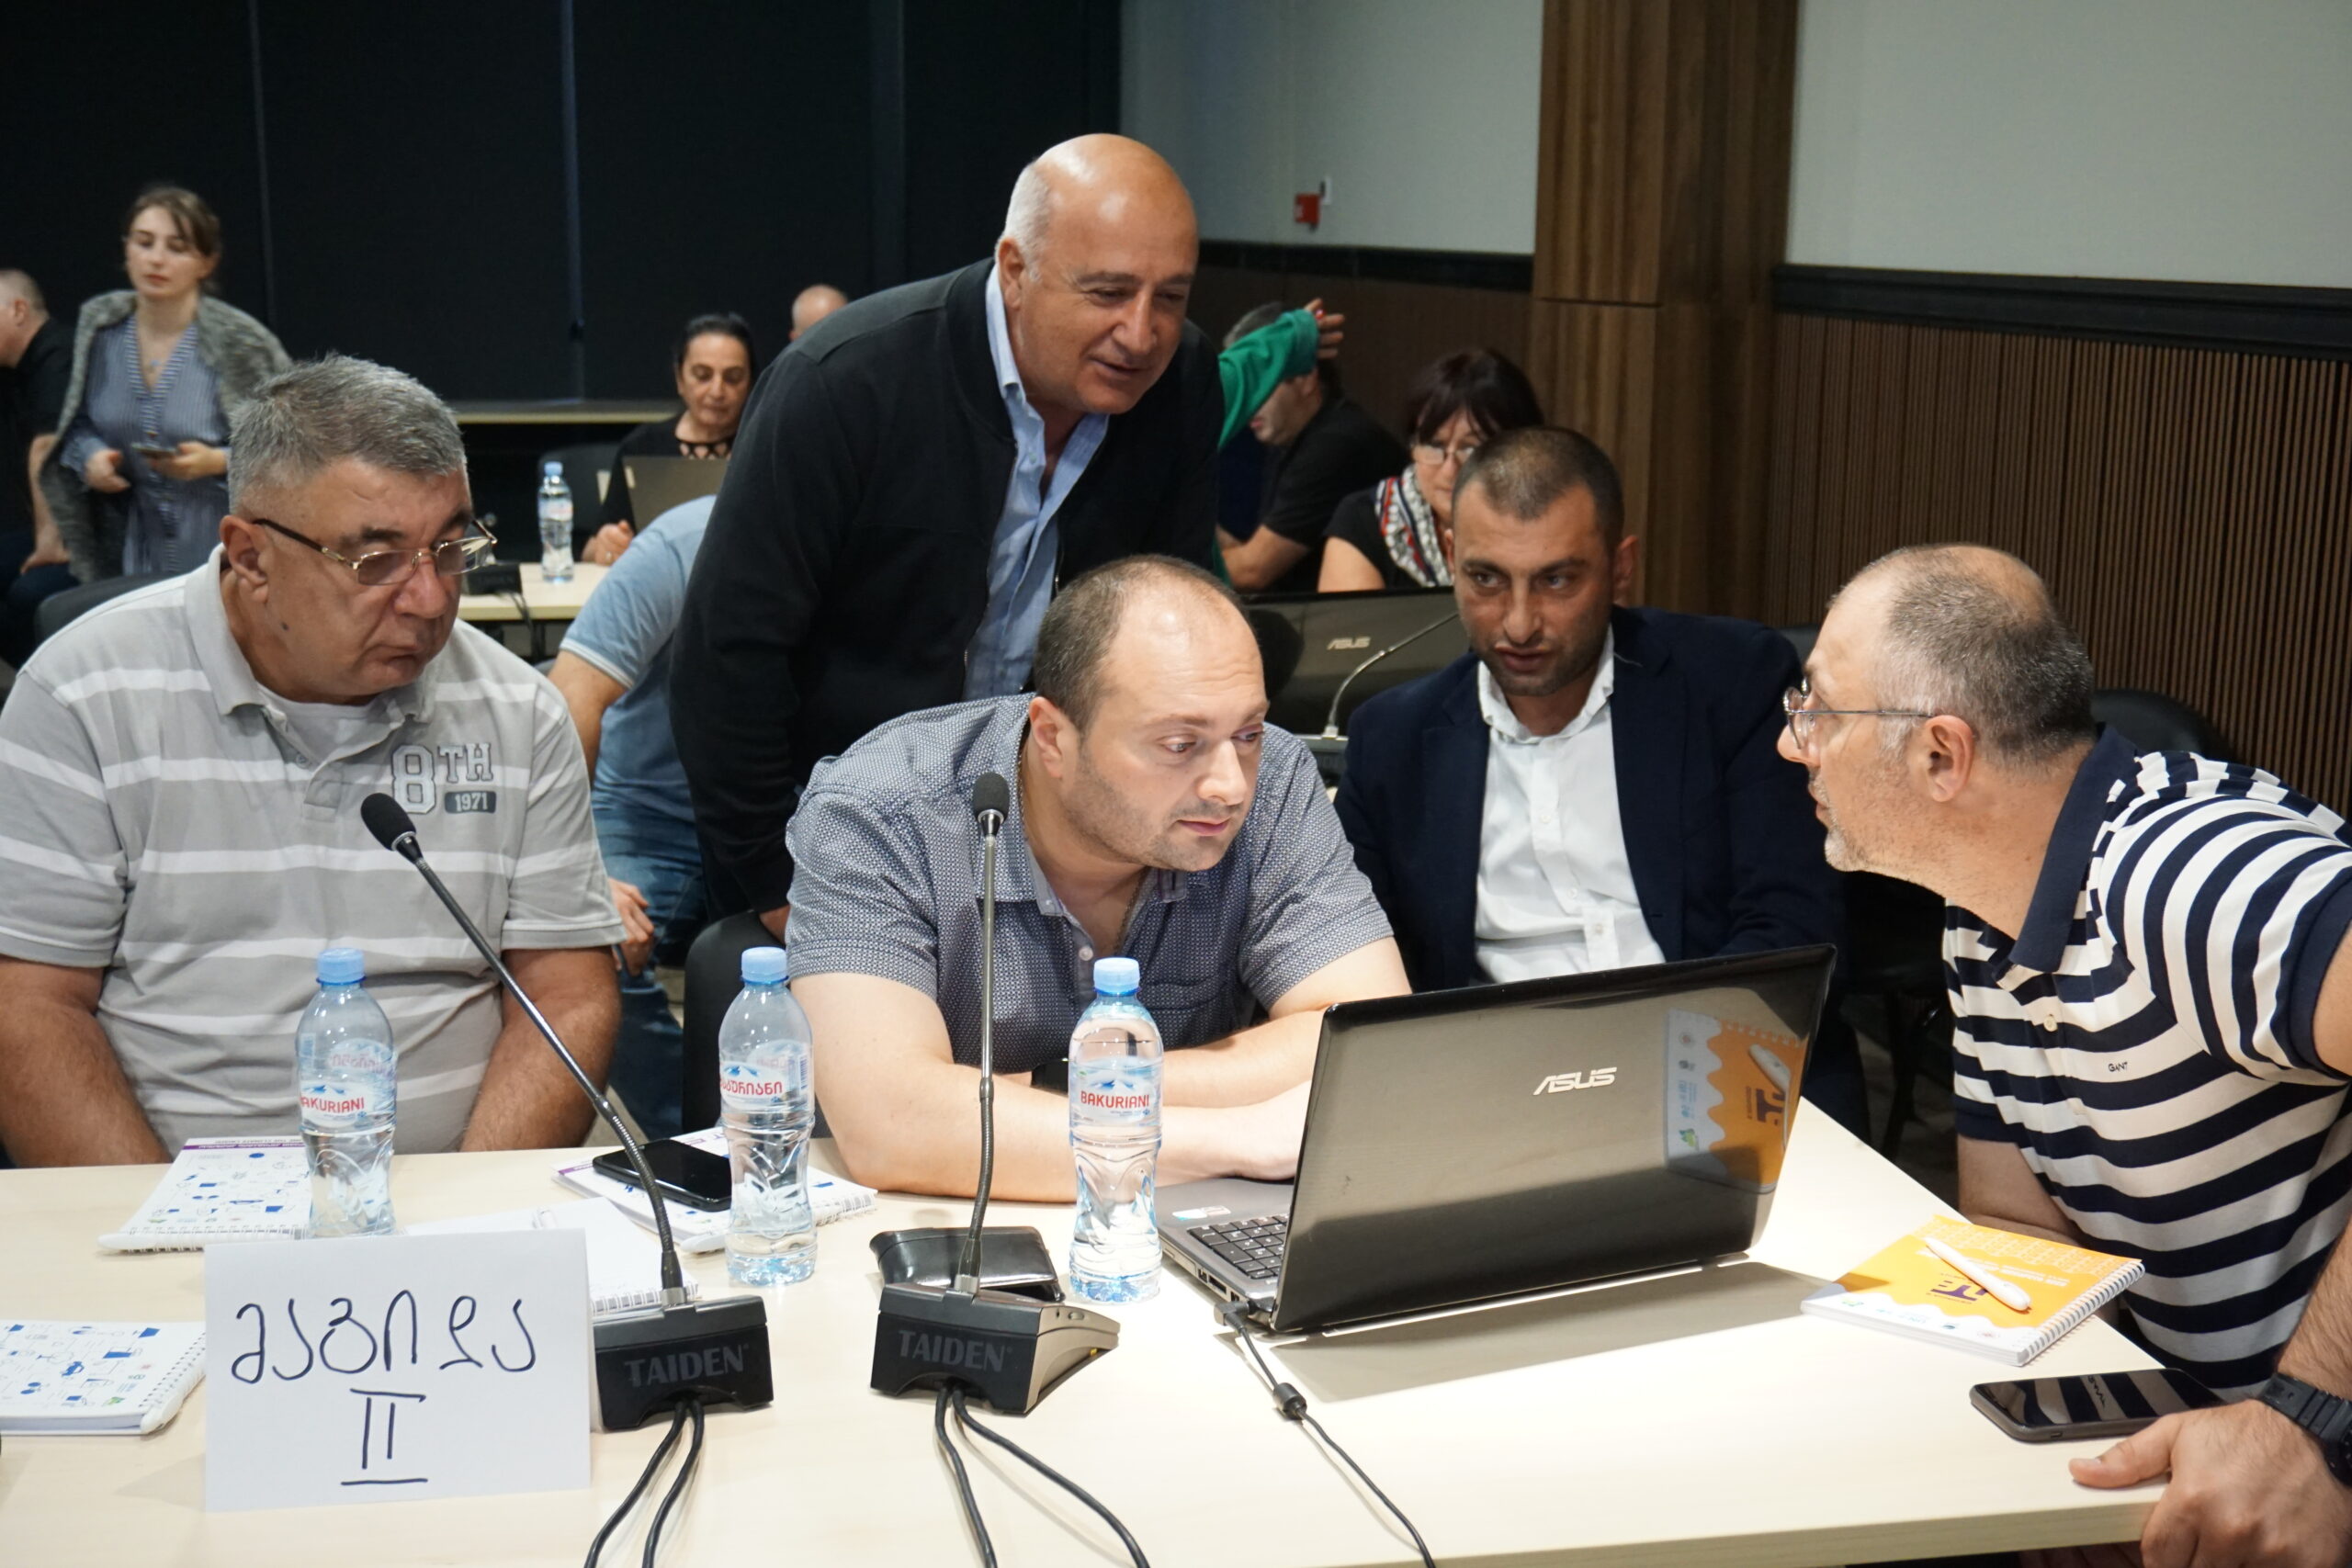 Technical Assistance Meetings For The Monitoring Of The Sustainable Energy And Climate Action Plans (SECAP) For The Covenant Of Mayors’ Signatory Municipalities Were Completed